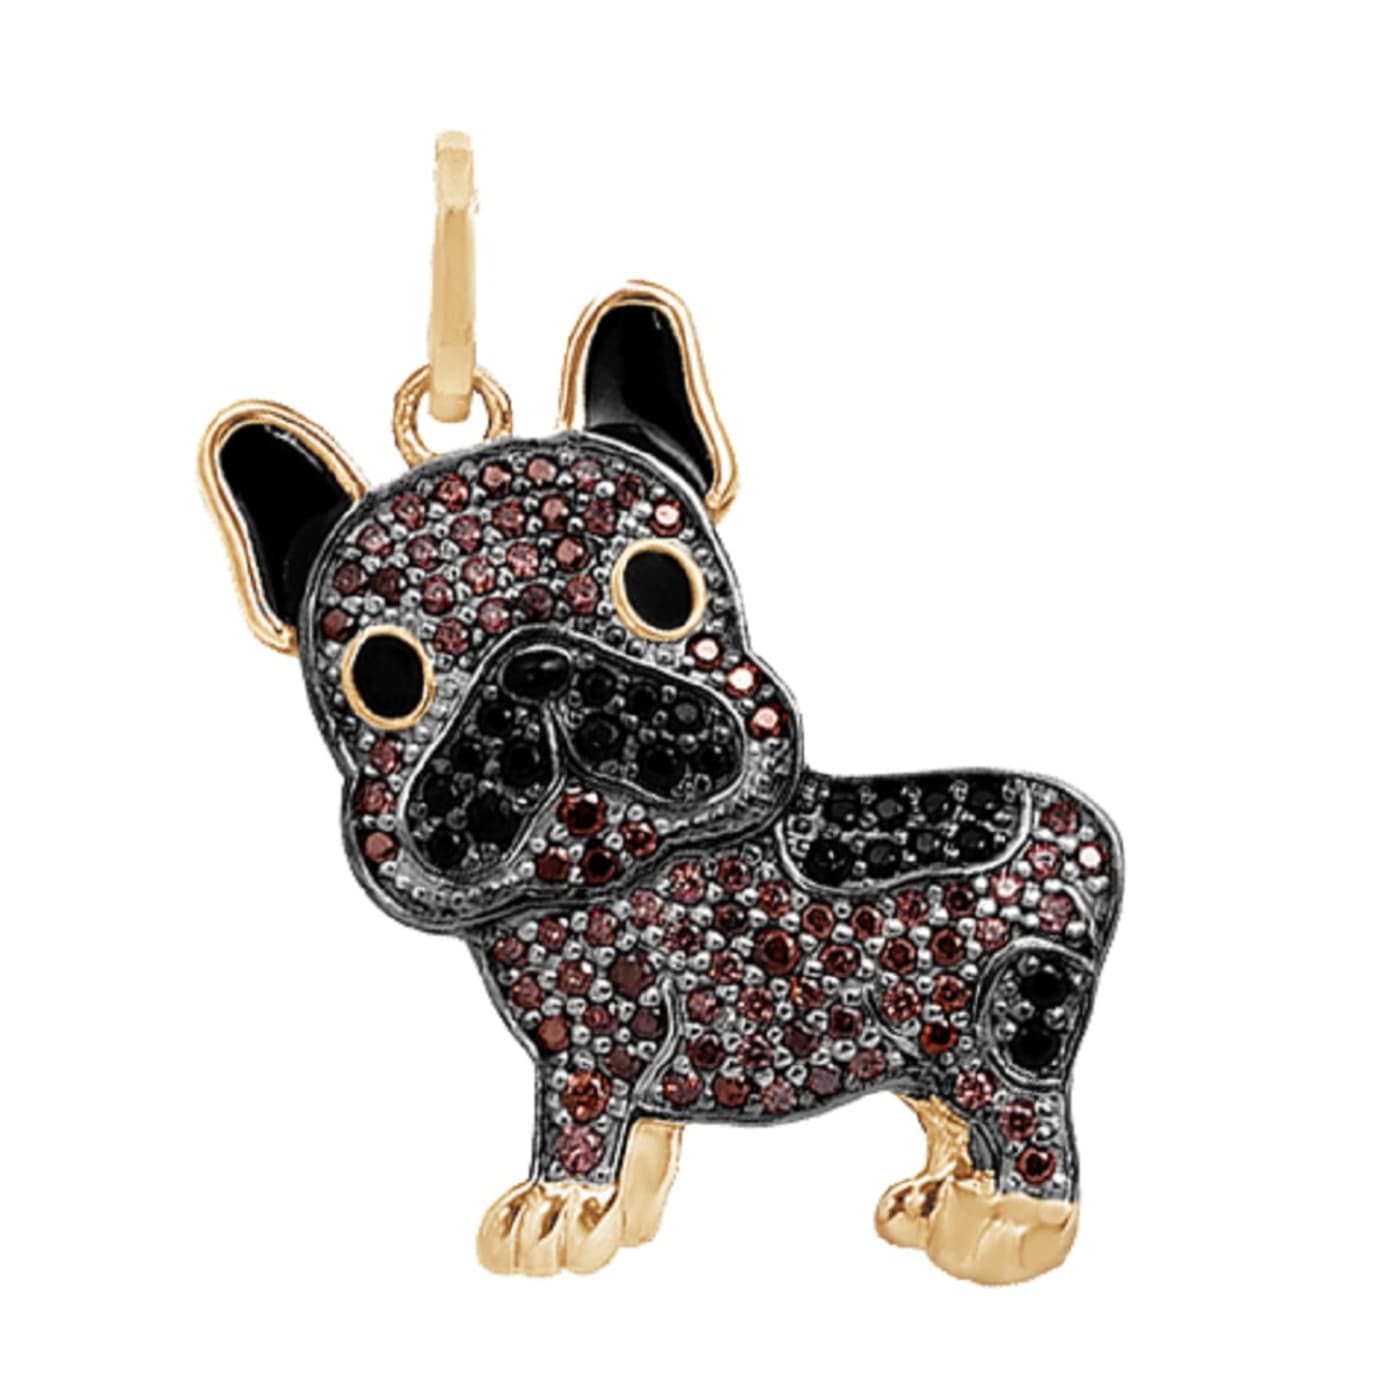 French Bulldog Necklace – pawies